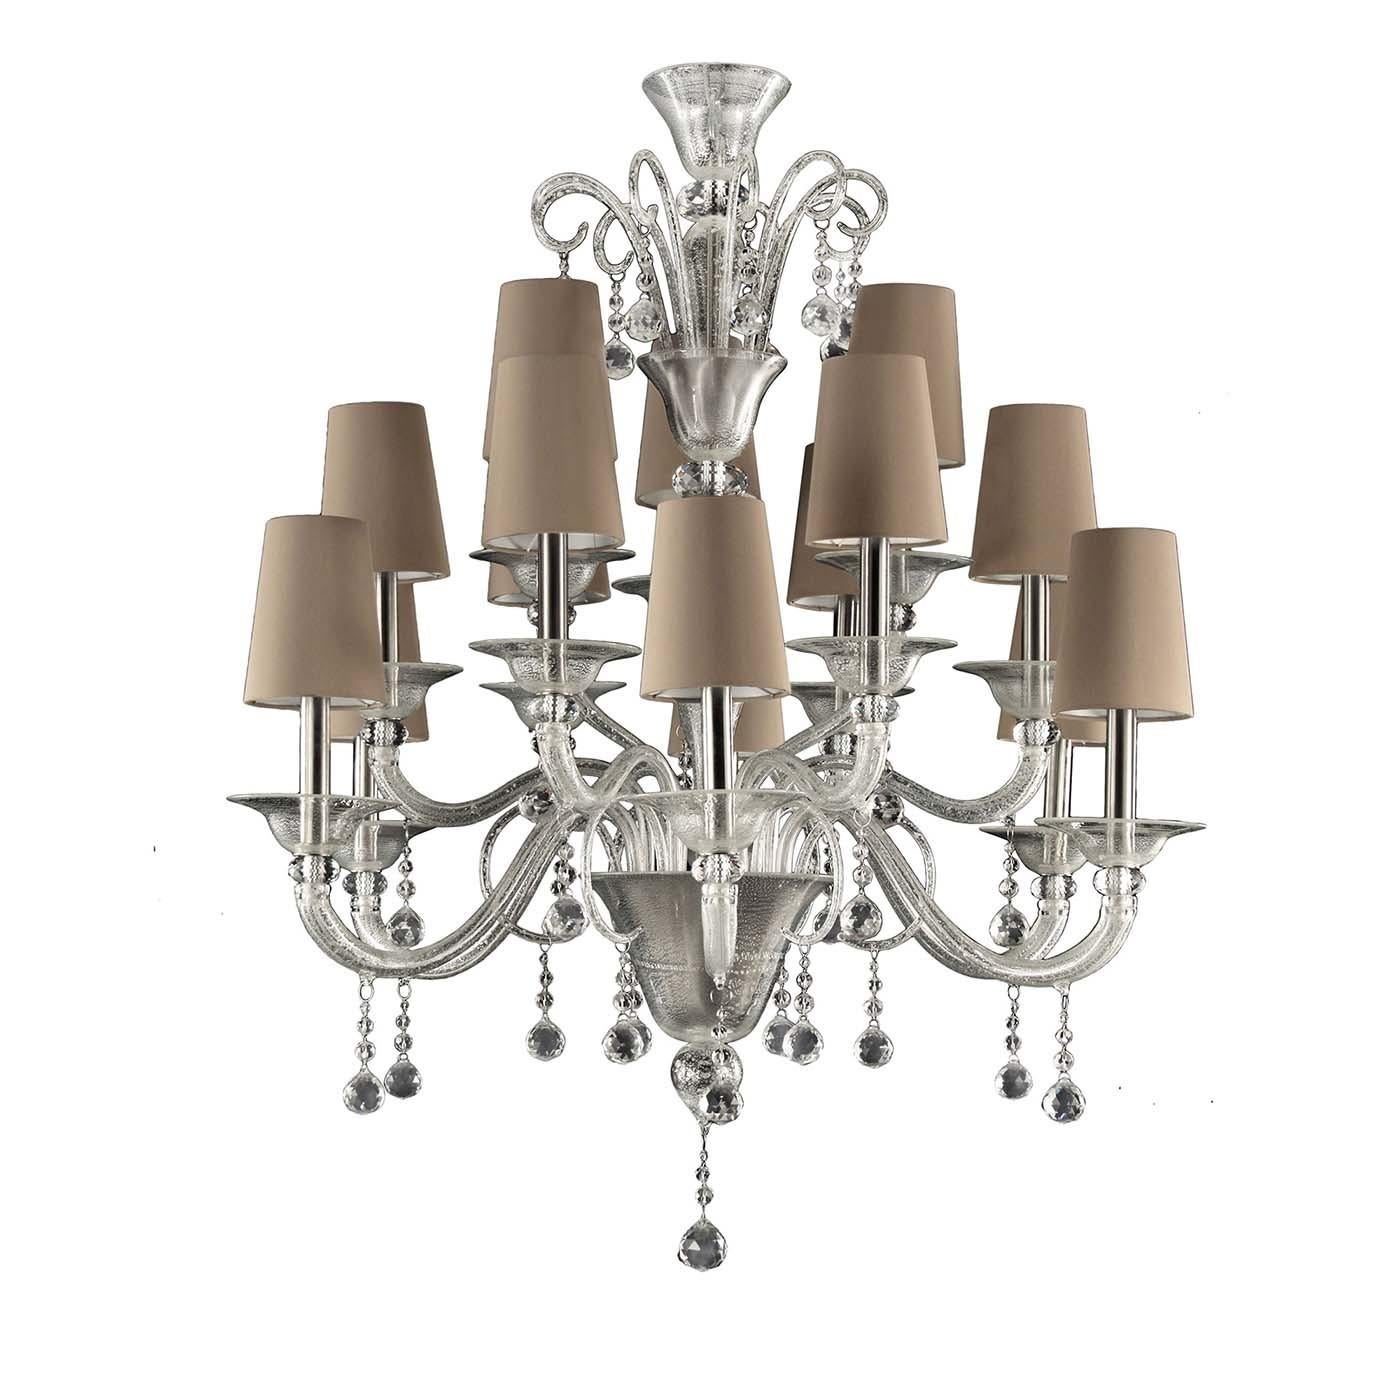 From the timeless line, the Multiforme collection dedicated to the Classic Murano chandeliers, comes the Murano chandelier in clear glass, with silver leaf. The elegant handcrafted lampshades are made from a refined cream colored cotton and feature